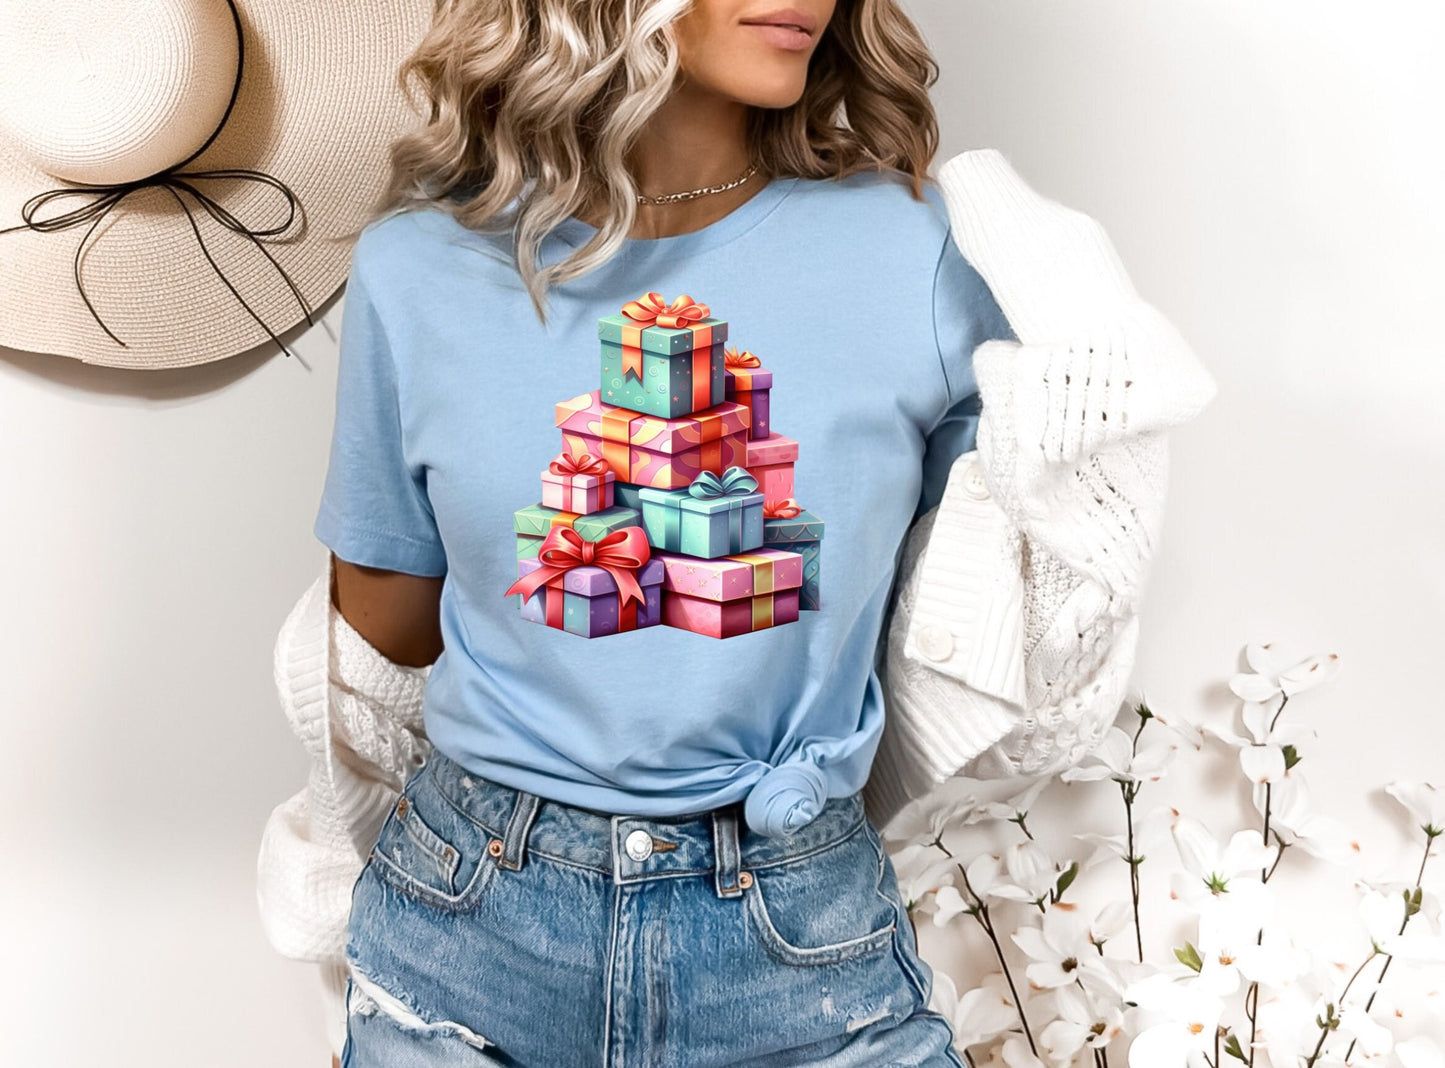 The Tower of Presents Christmas Shirt Makes the Perfect Gift for Friends, Family, Coworkers or yourself.  Check Out My Shop for even more Great Designs. www.scorpiontees.etsy.com